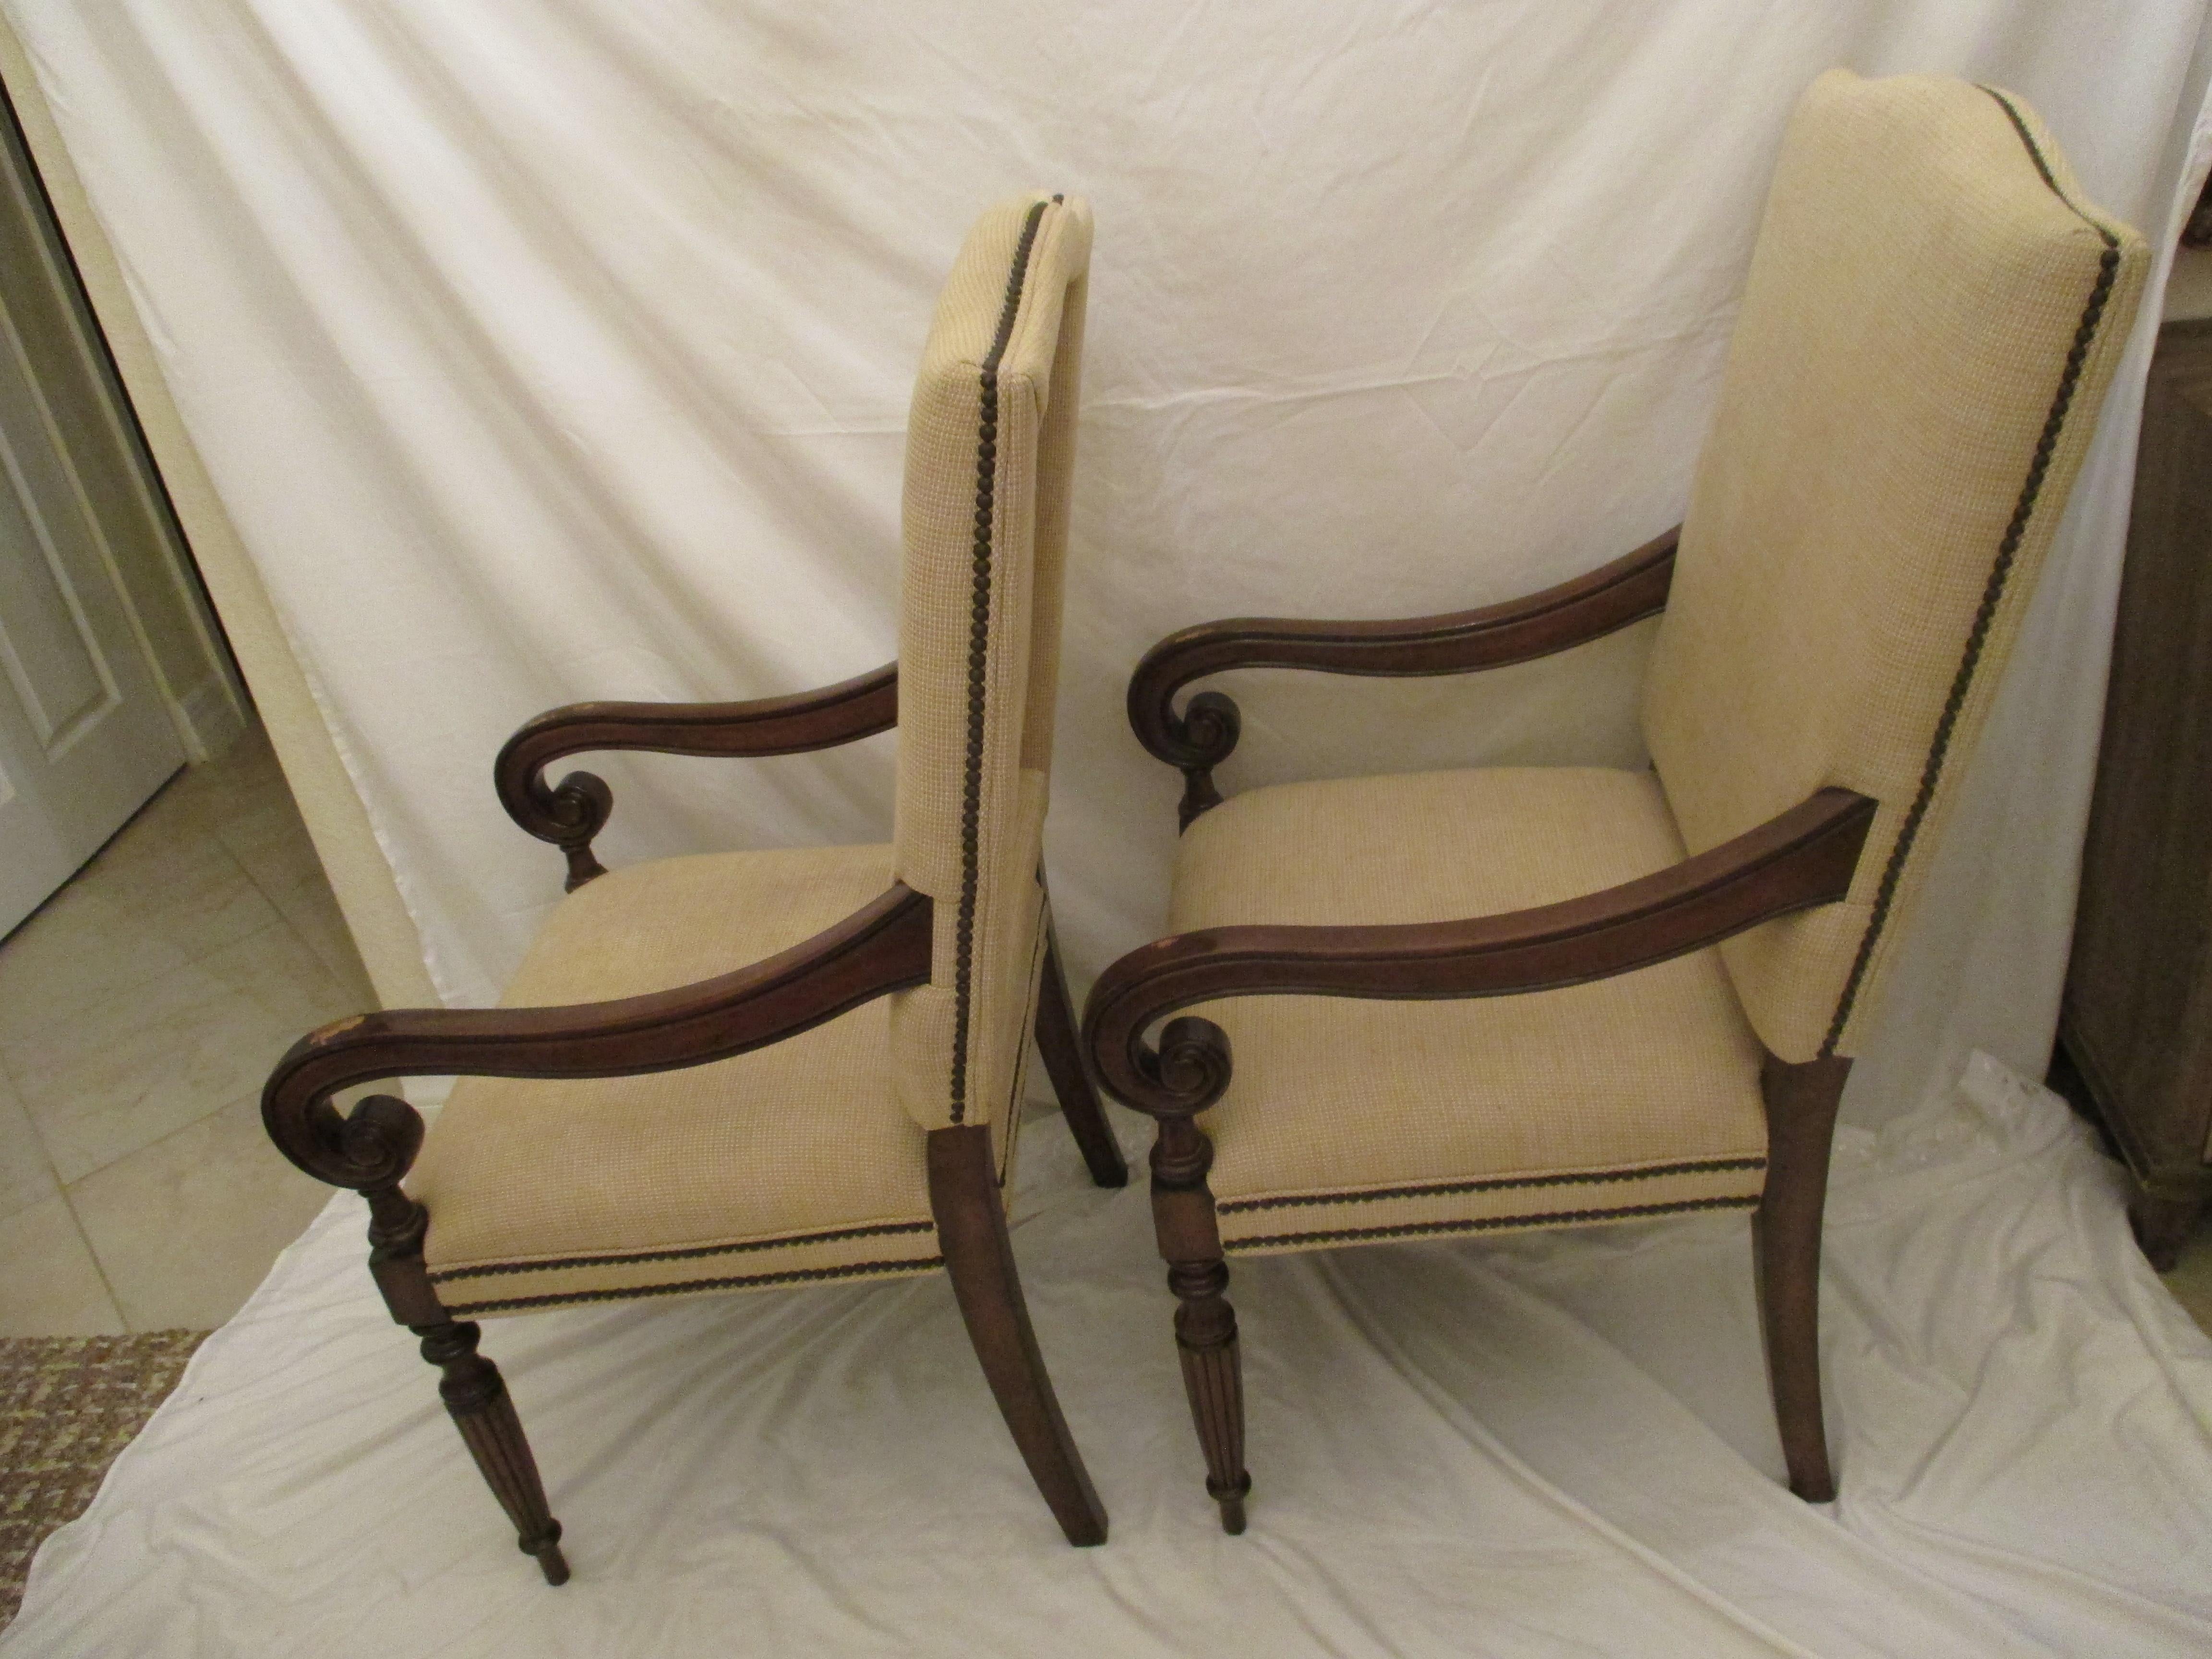 Pair of dark stained upholstered club chairs with original neutral upholstery in good condition. Chairs have nailhead trim and signs of wear on top of arms. Measurements are listed, however, floor to top of arm is 26.75.”